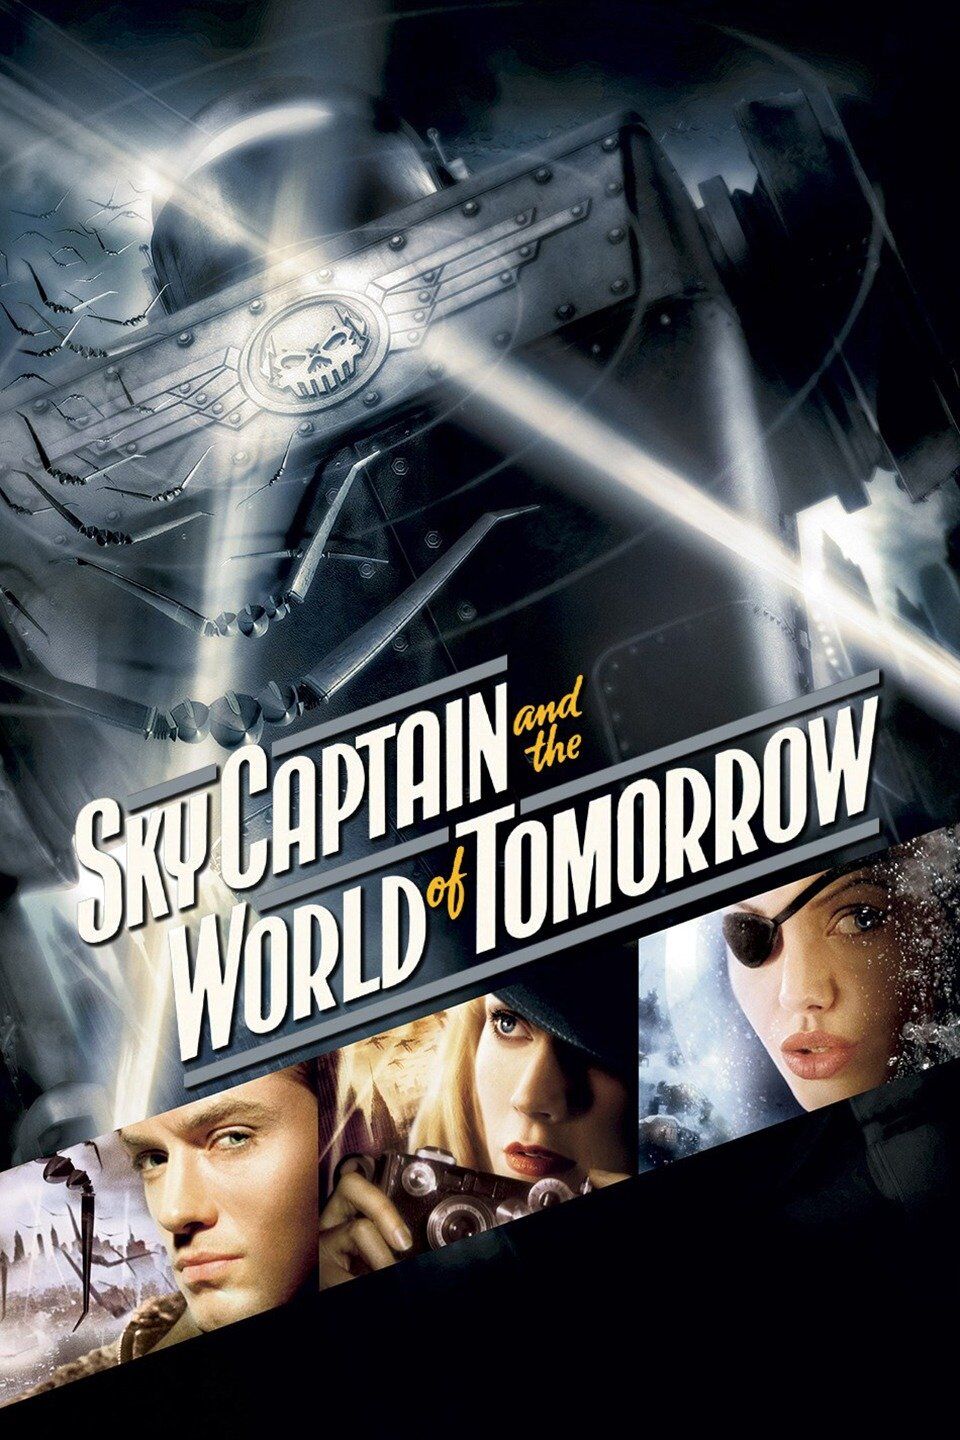 Amphibious fighter planes, Sky Captain And The World of Tomorrow Wiki